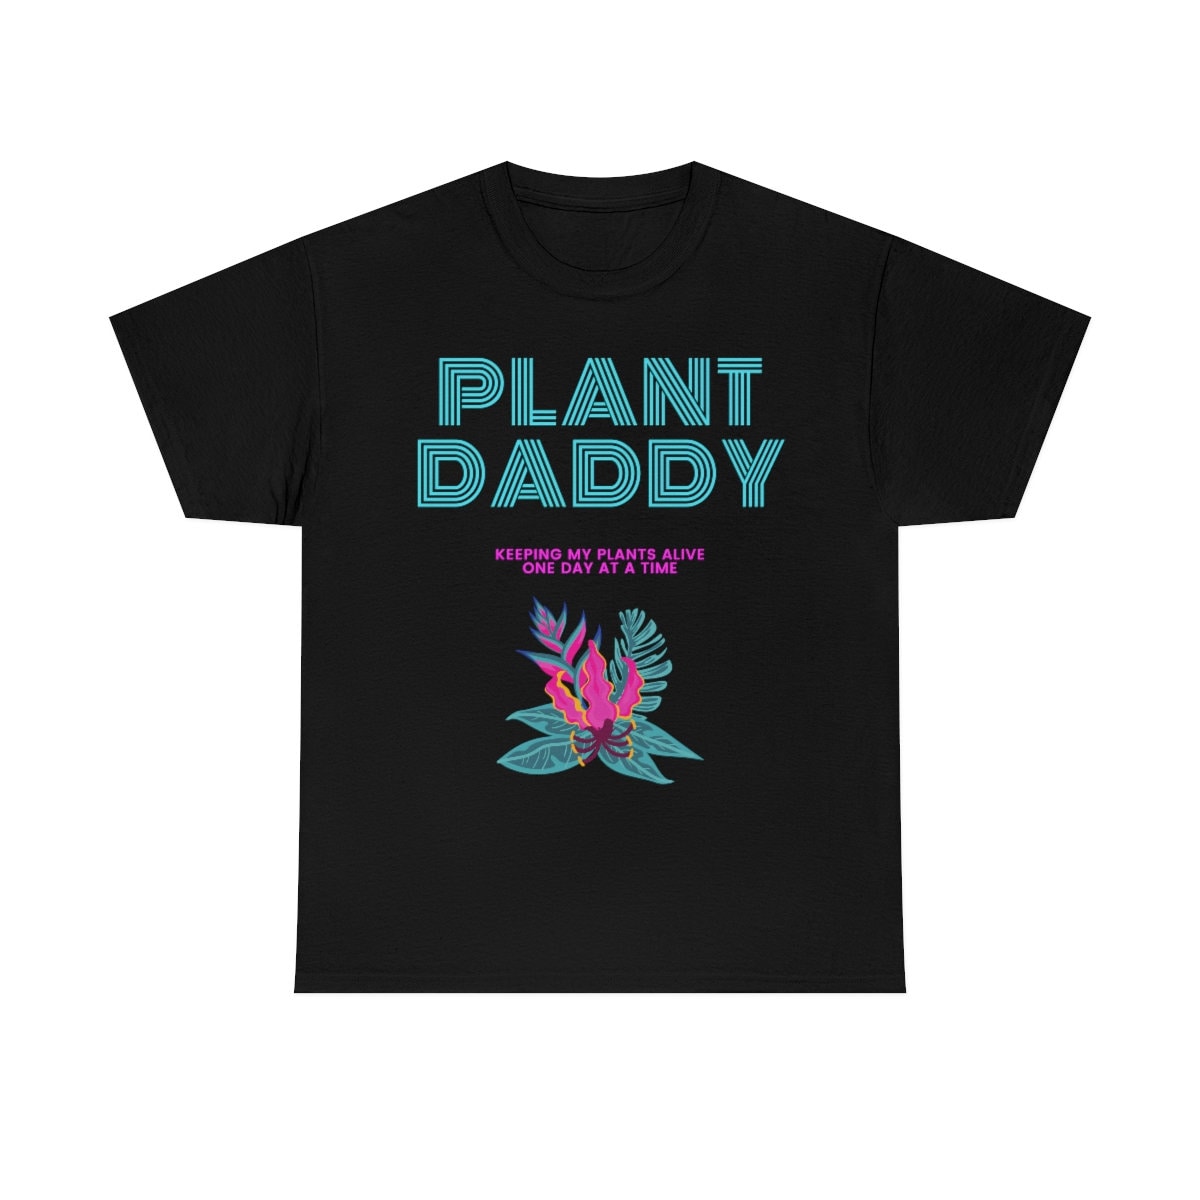 Plant Dad T Shirt, Plant Daddy, Plant Shirt for Men, Plant Gift, Plant Lover, Retro, Funny, Cool T Shirt